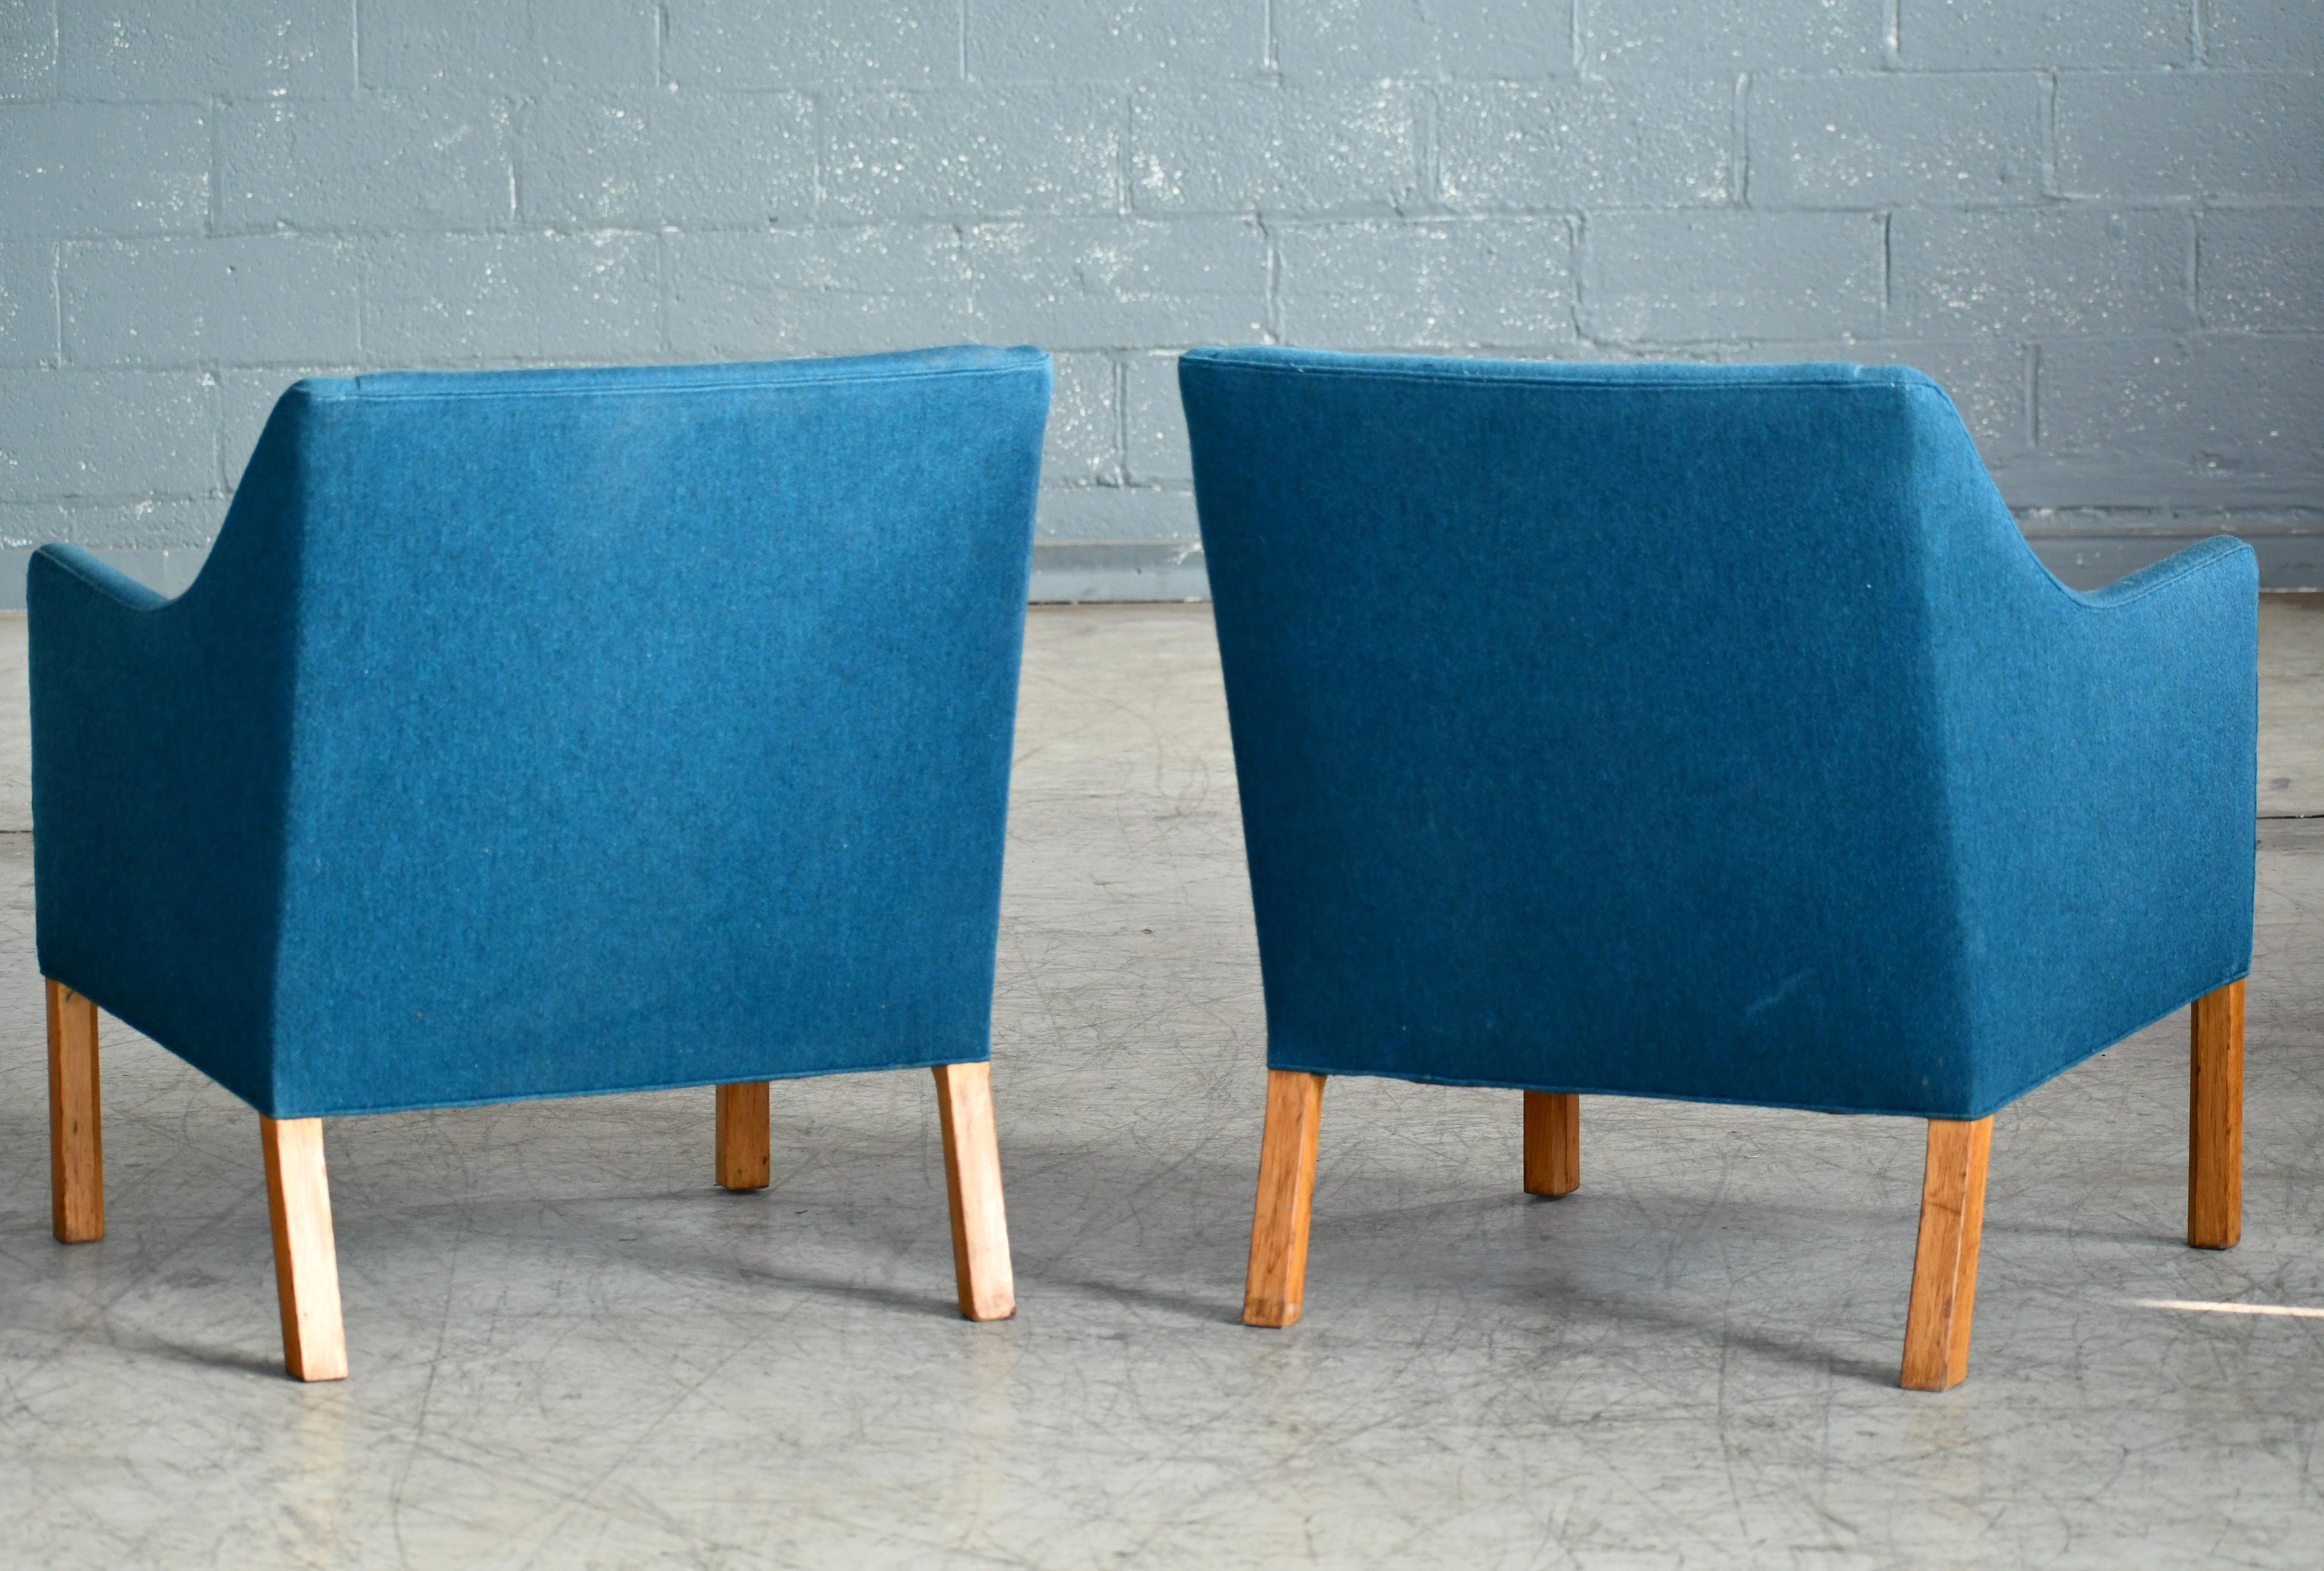 Mid-20th Century Pair of Danish Midcentury Lounge Chairs Attributed to Ejnar Larsen & Axel Bender